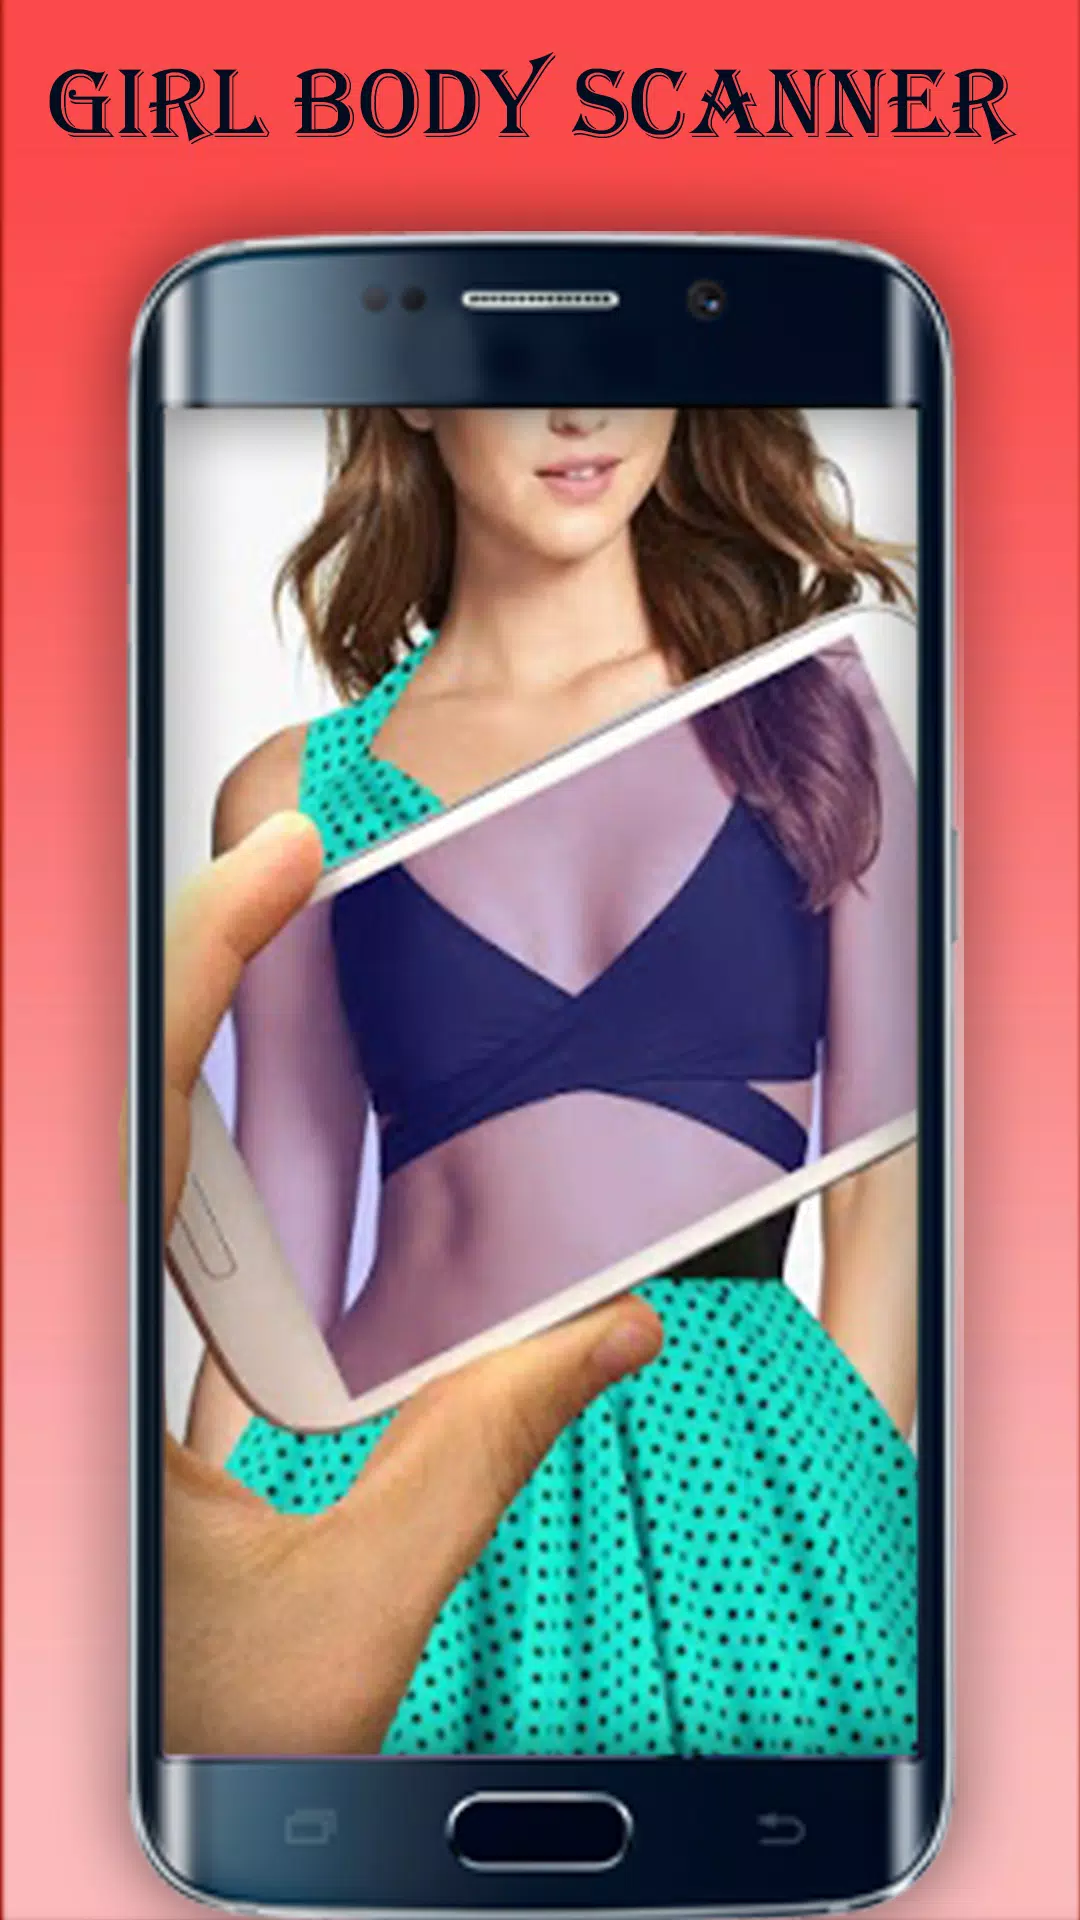 Girl Body Scanner for Android - APK Download